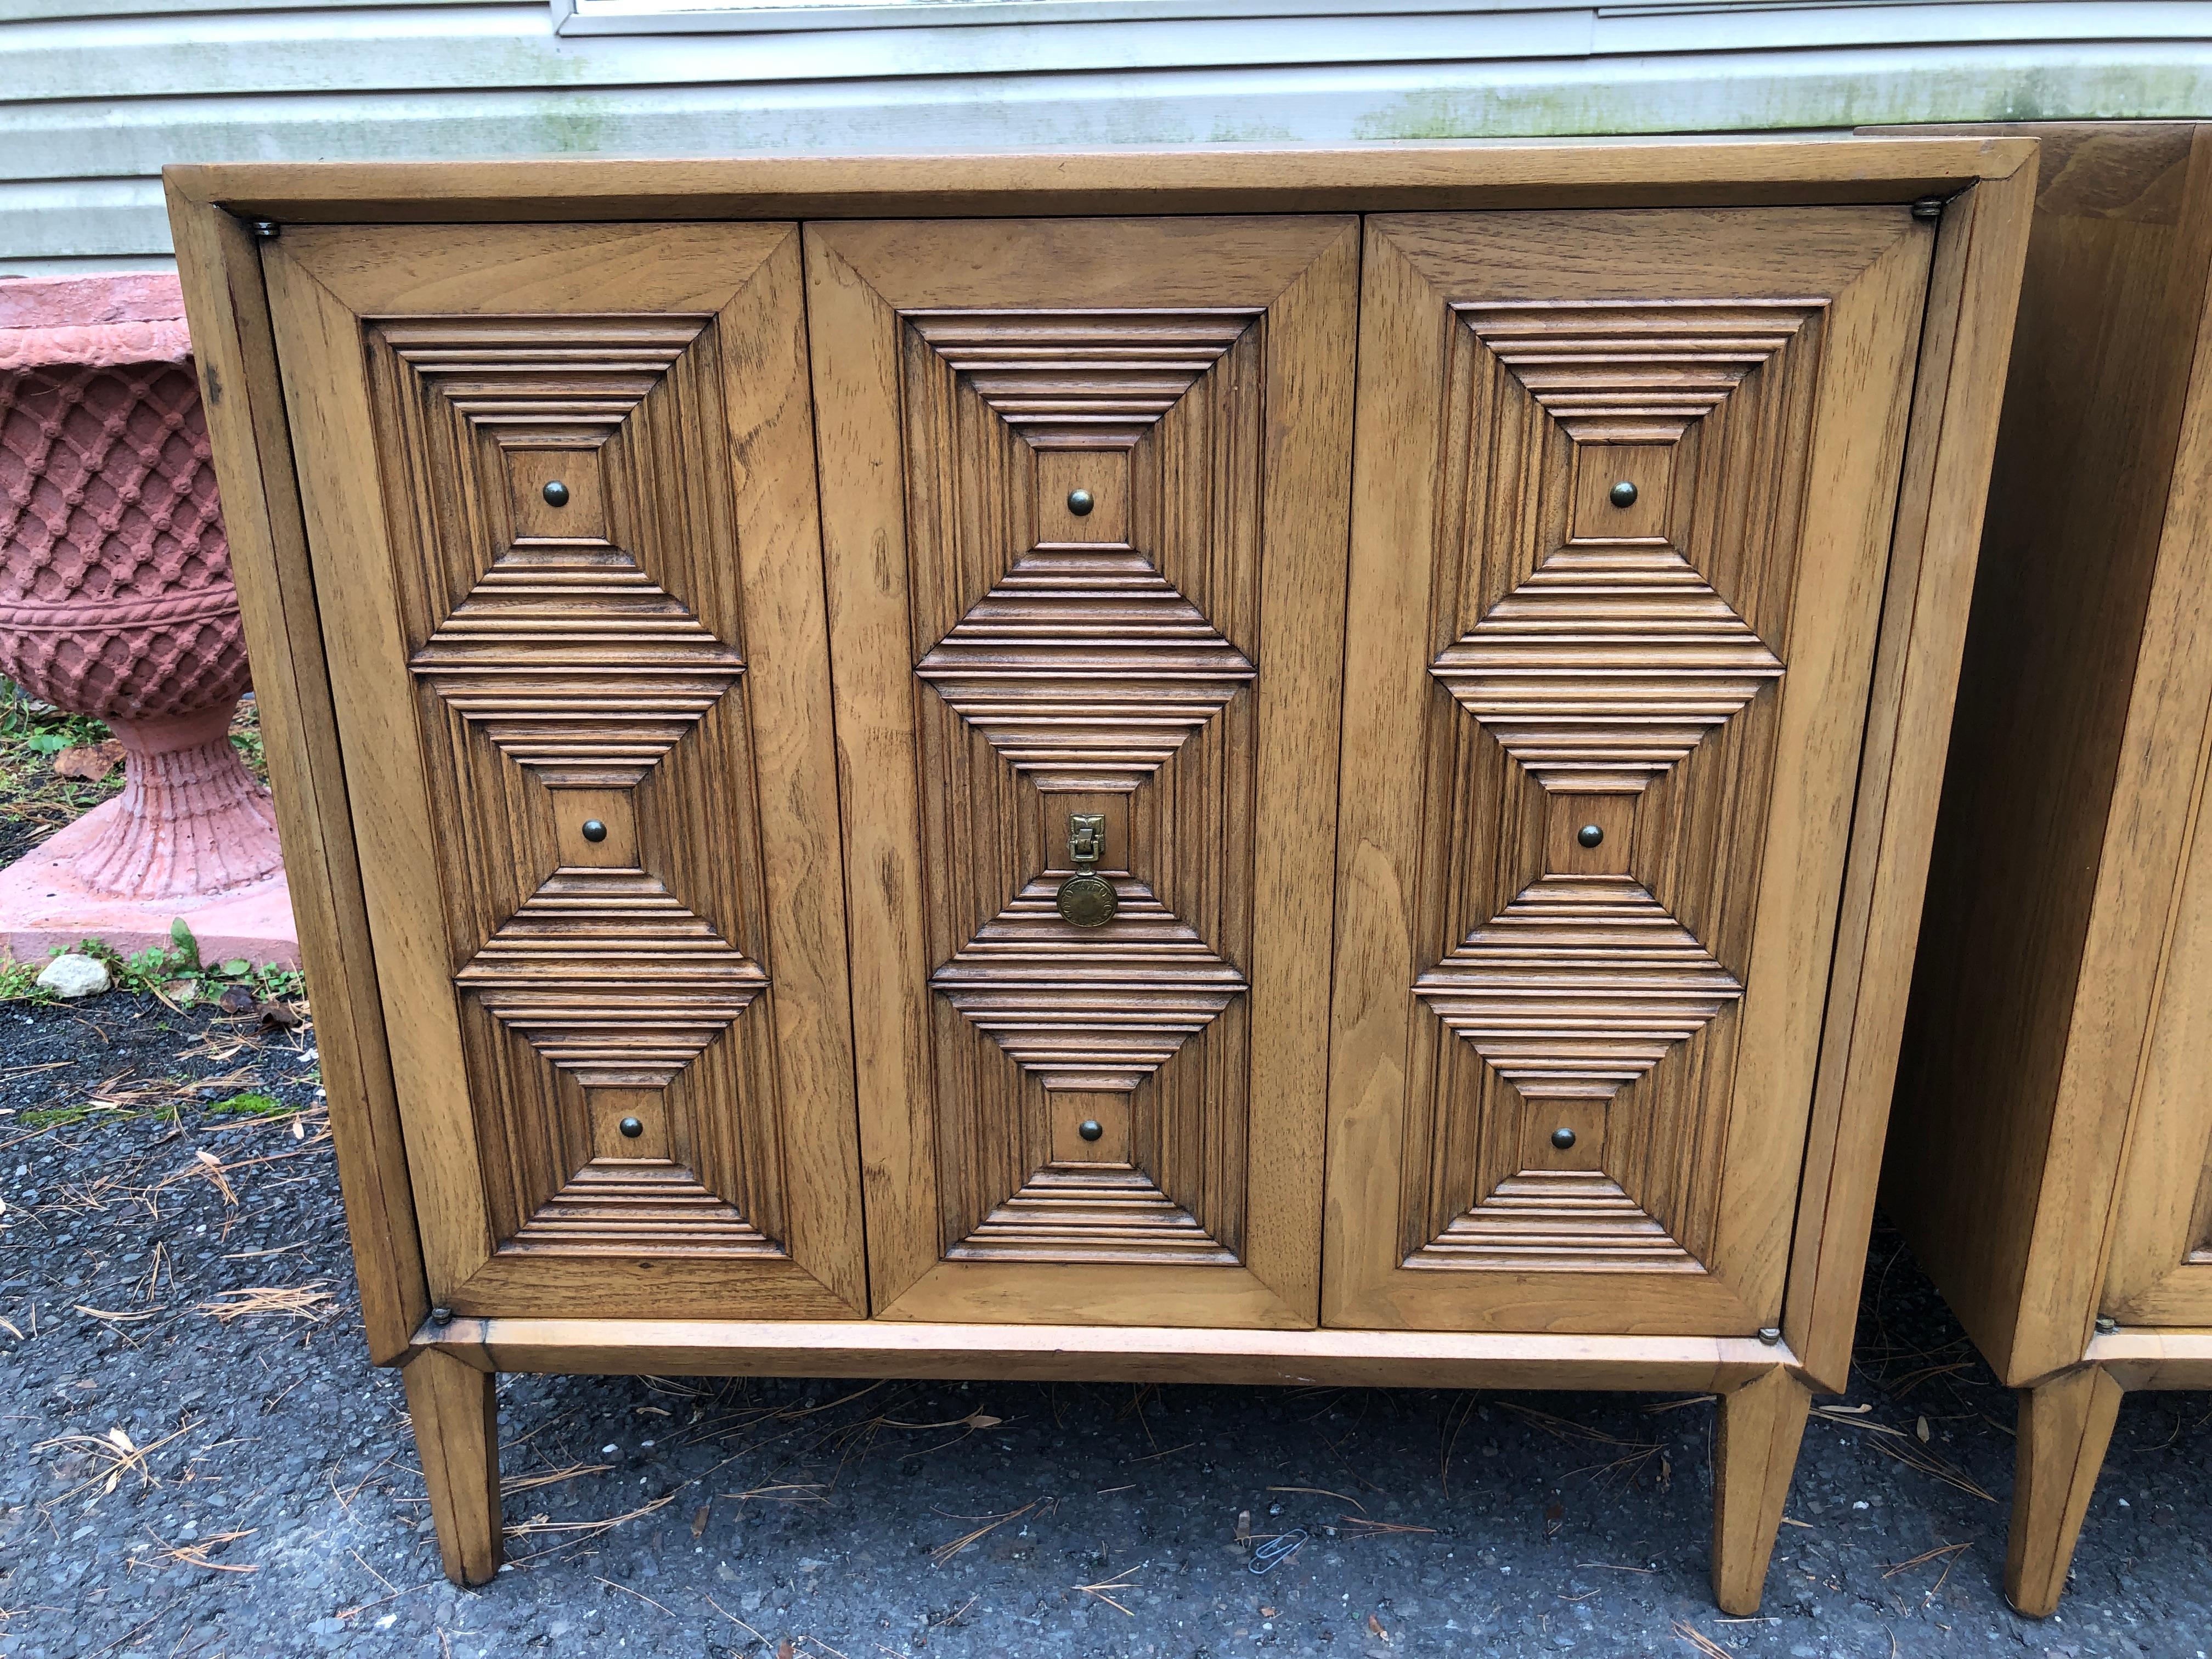 Exciting Pair John Stuart CasaLuda Collection Bachelors Chest Mid-Century Modern In Good Condition For Sale In Pemberton, NJ